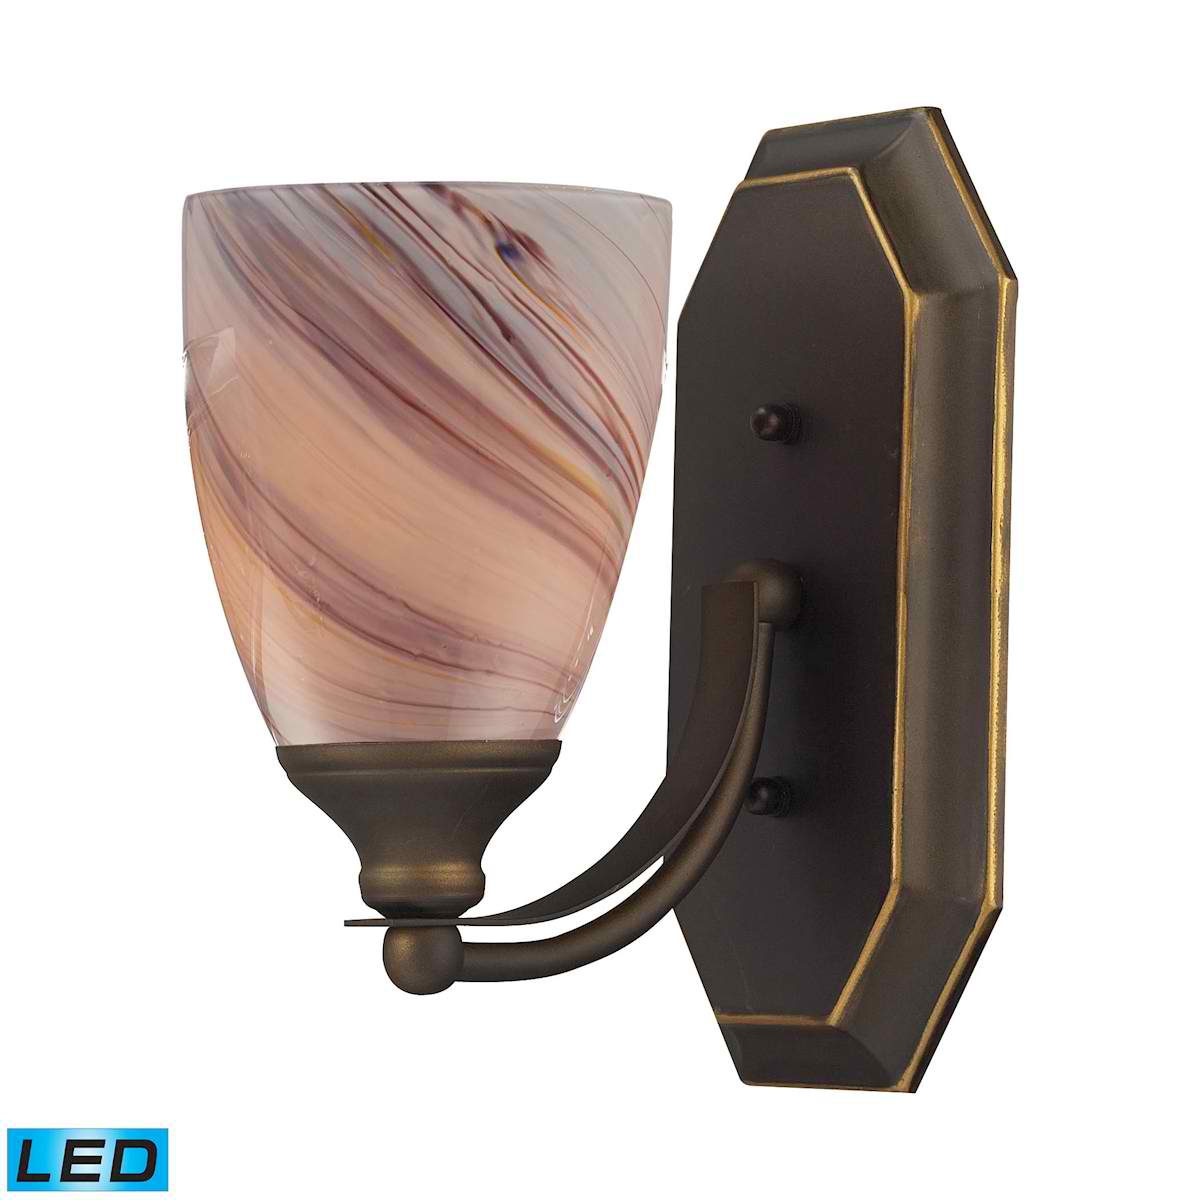 1 Light Vanity in Aged Bronze and Creme Glass - LED Offering Up To 800 Lumens (60 Watt Equivalent)